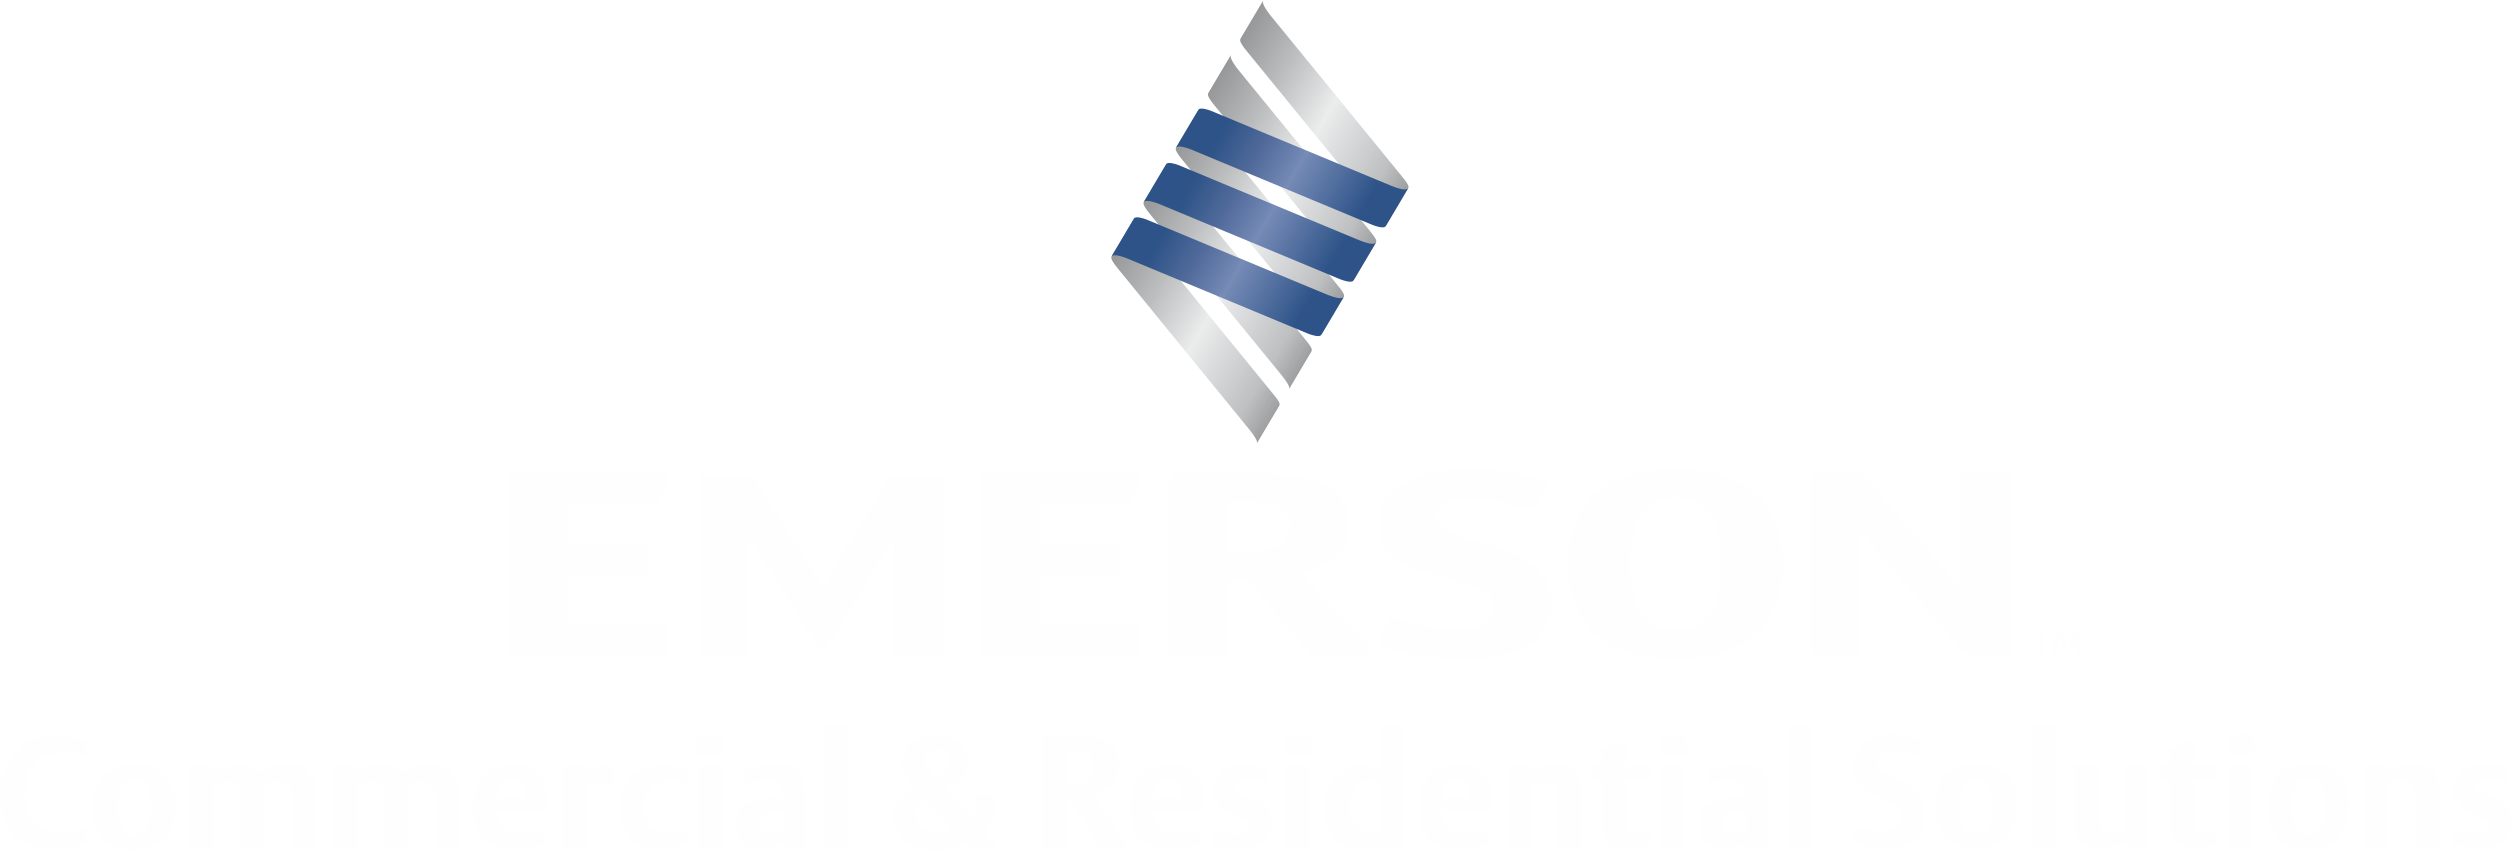 Emerson - Residencial e Commercial Solutions